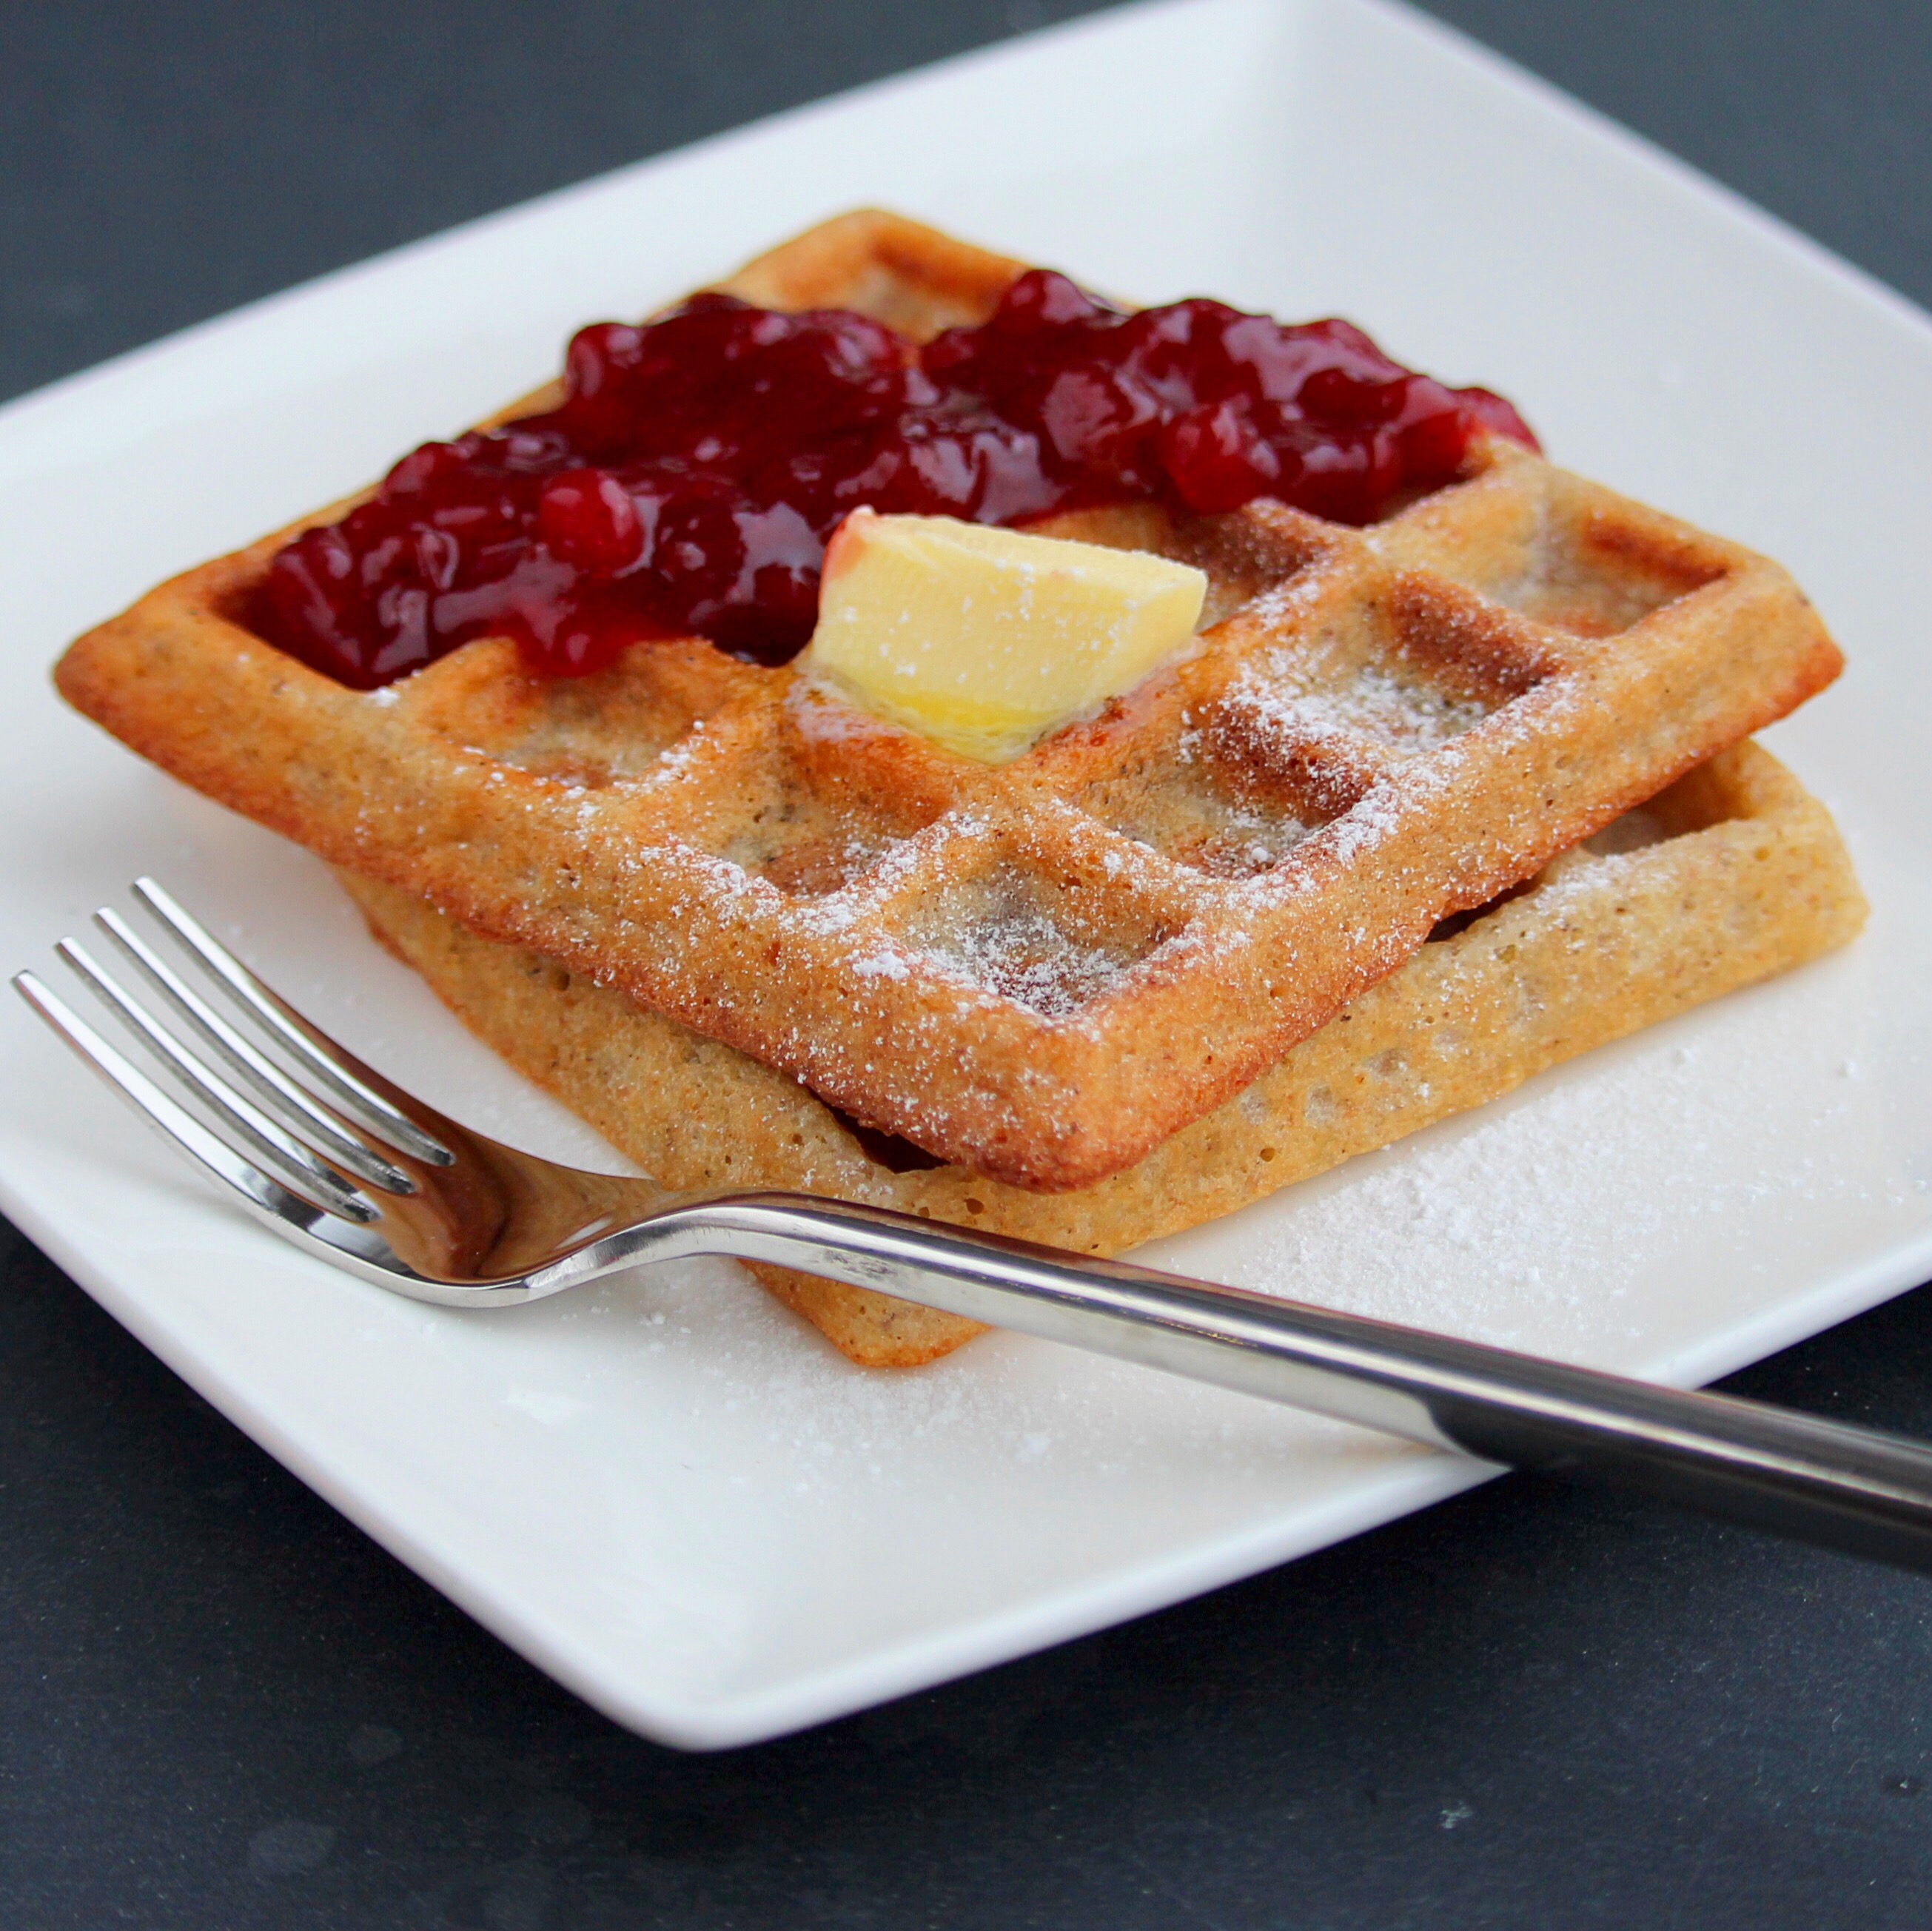 Delectable Organic Gluten-Free Waffles